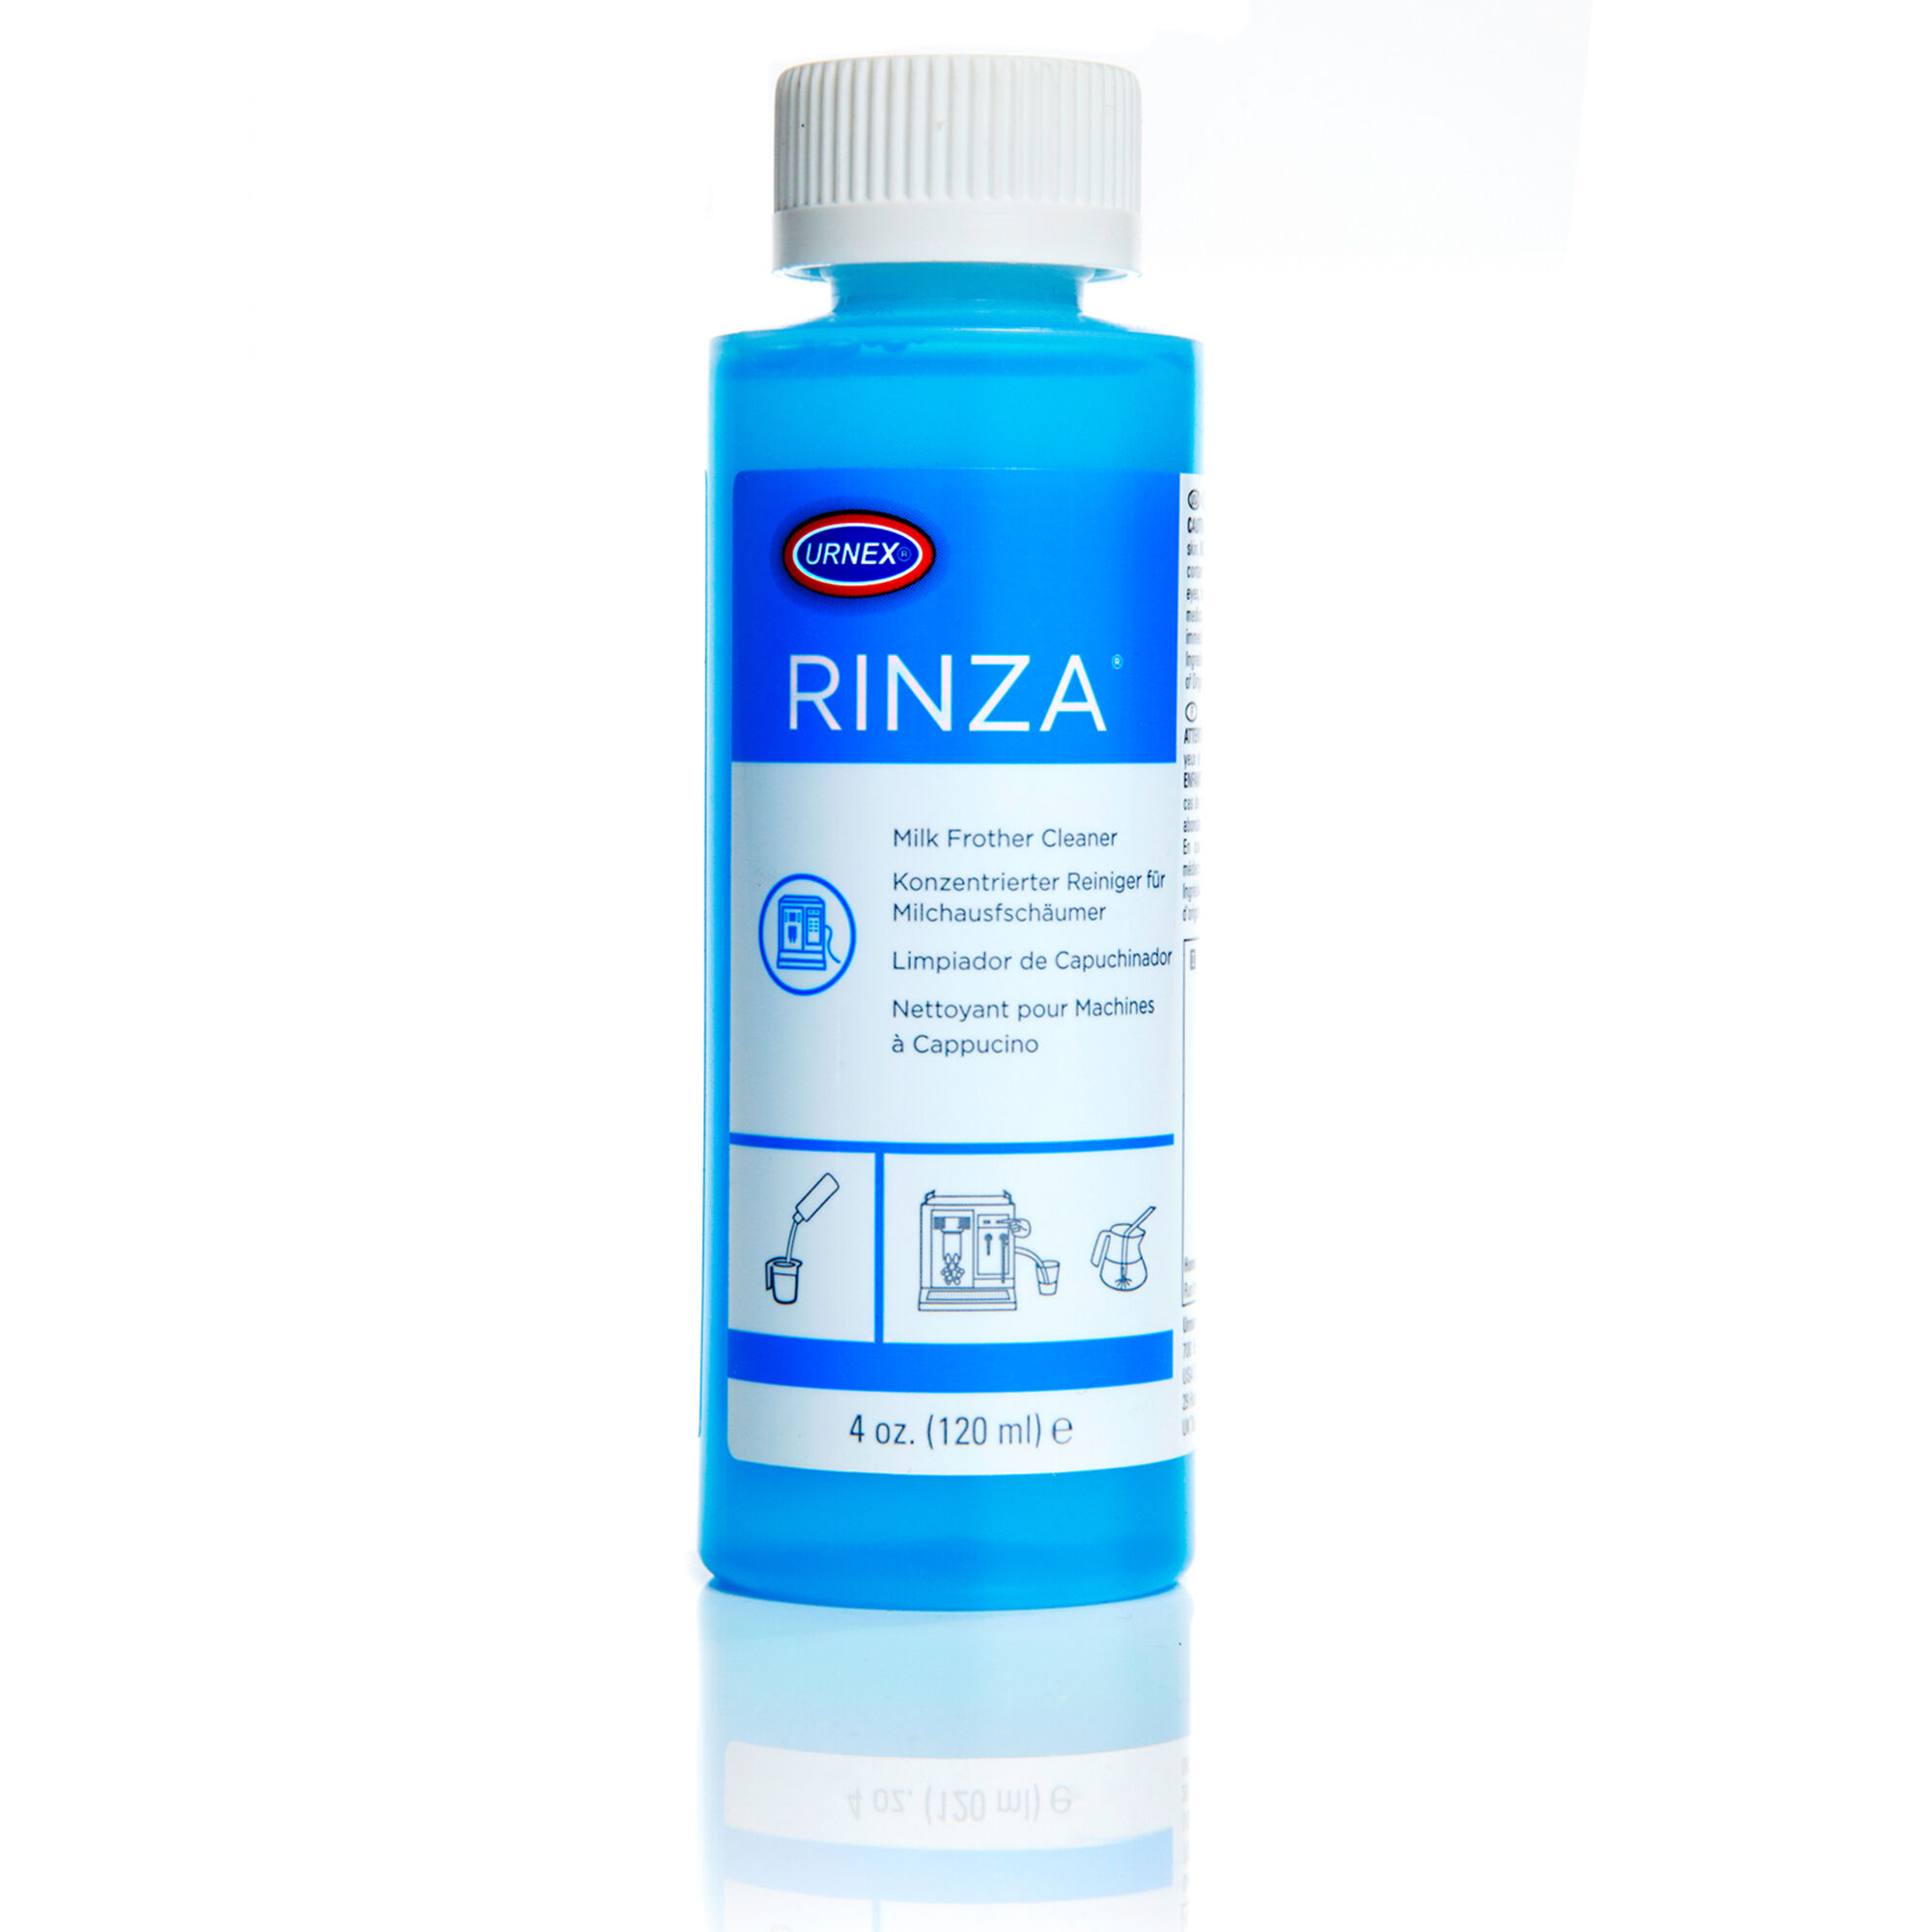 Rinza cleaner for milk frothers and steam wands